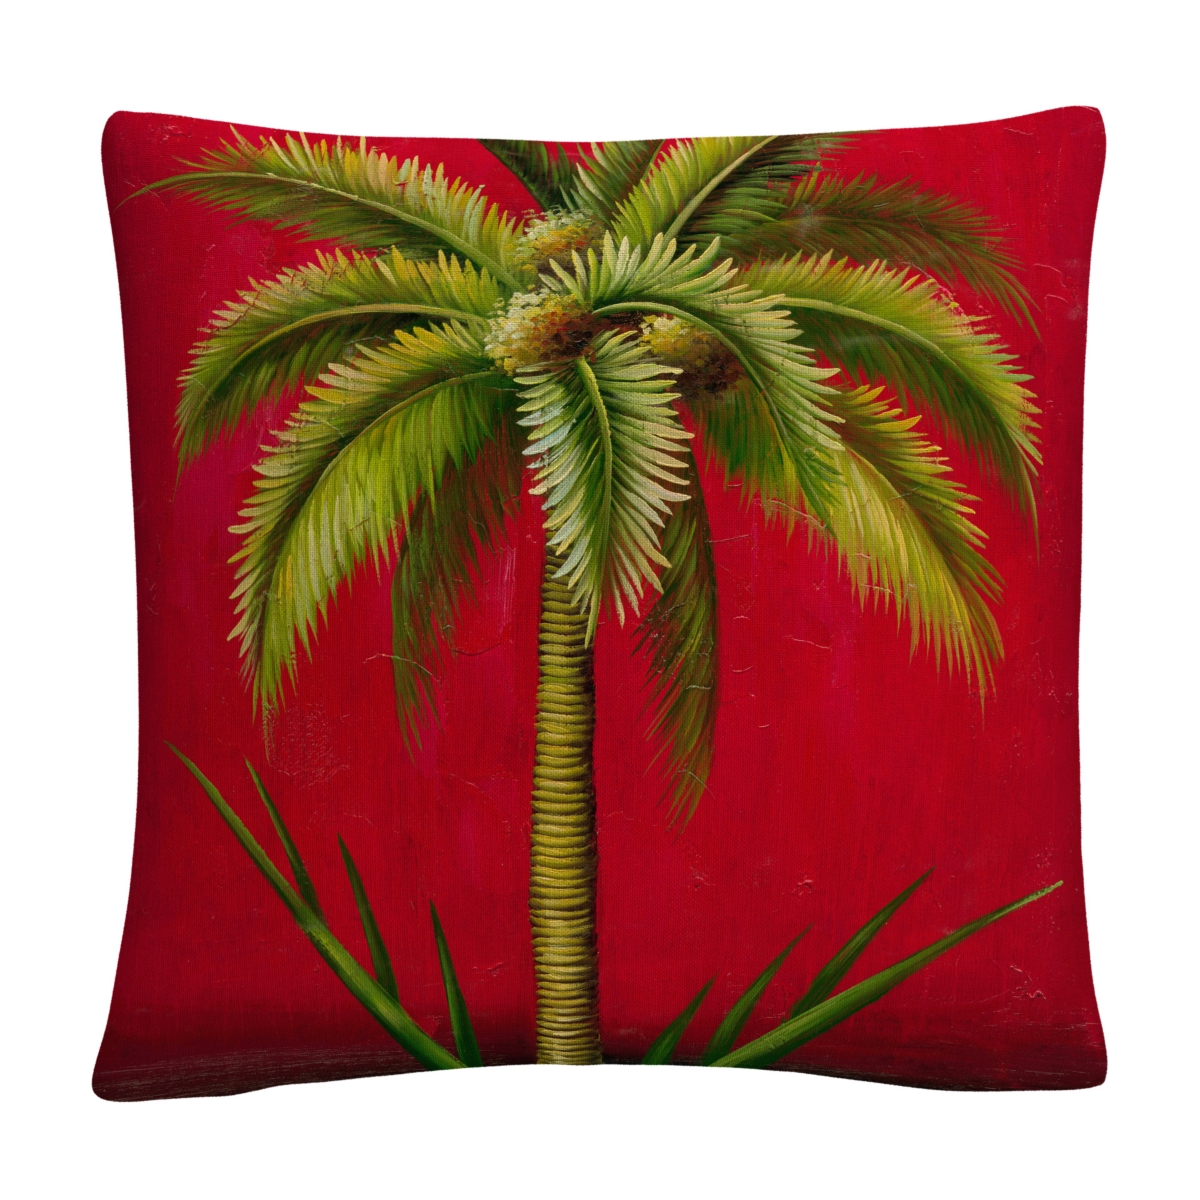 Masters Fine Art Tropical Palm I Mid Century Red Decorative Pillow, 16 x 16